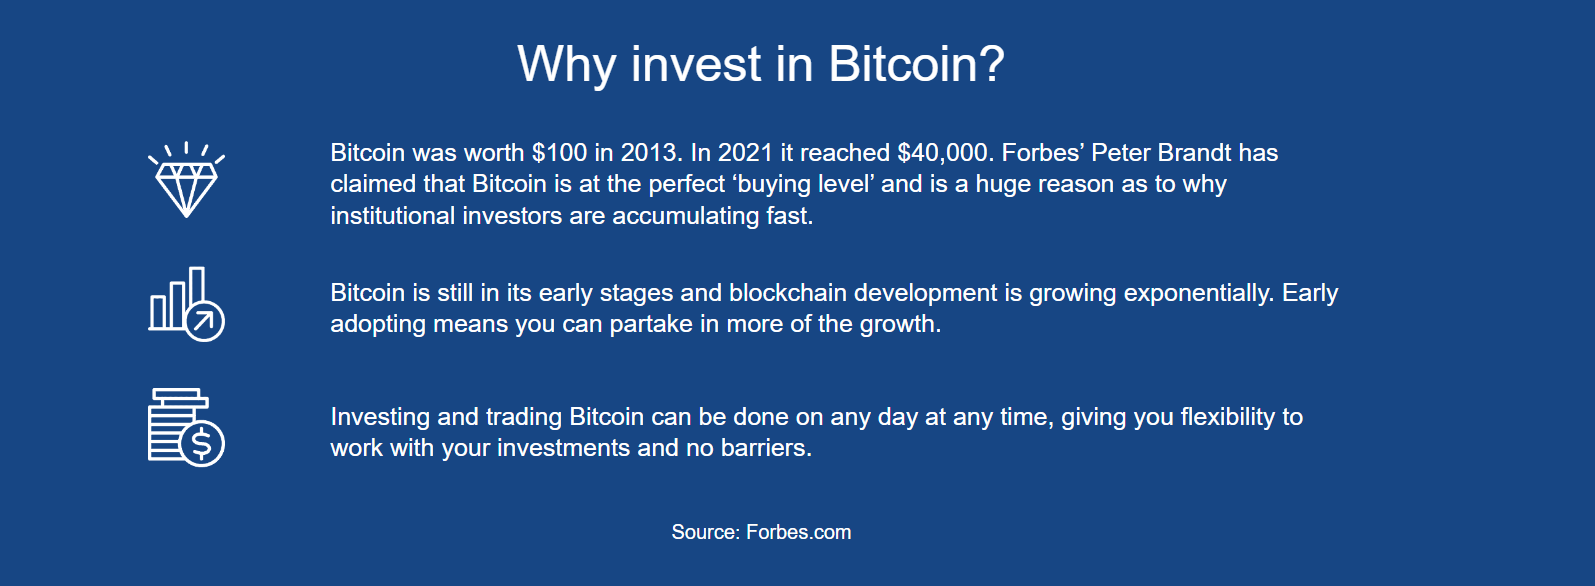 Reasons to invest in Bitcoin presented on the website of Bitcoin Loophole